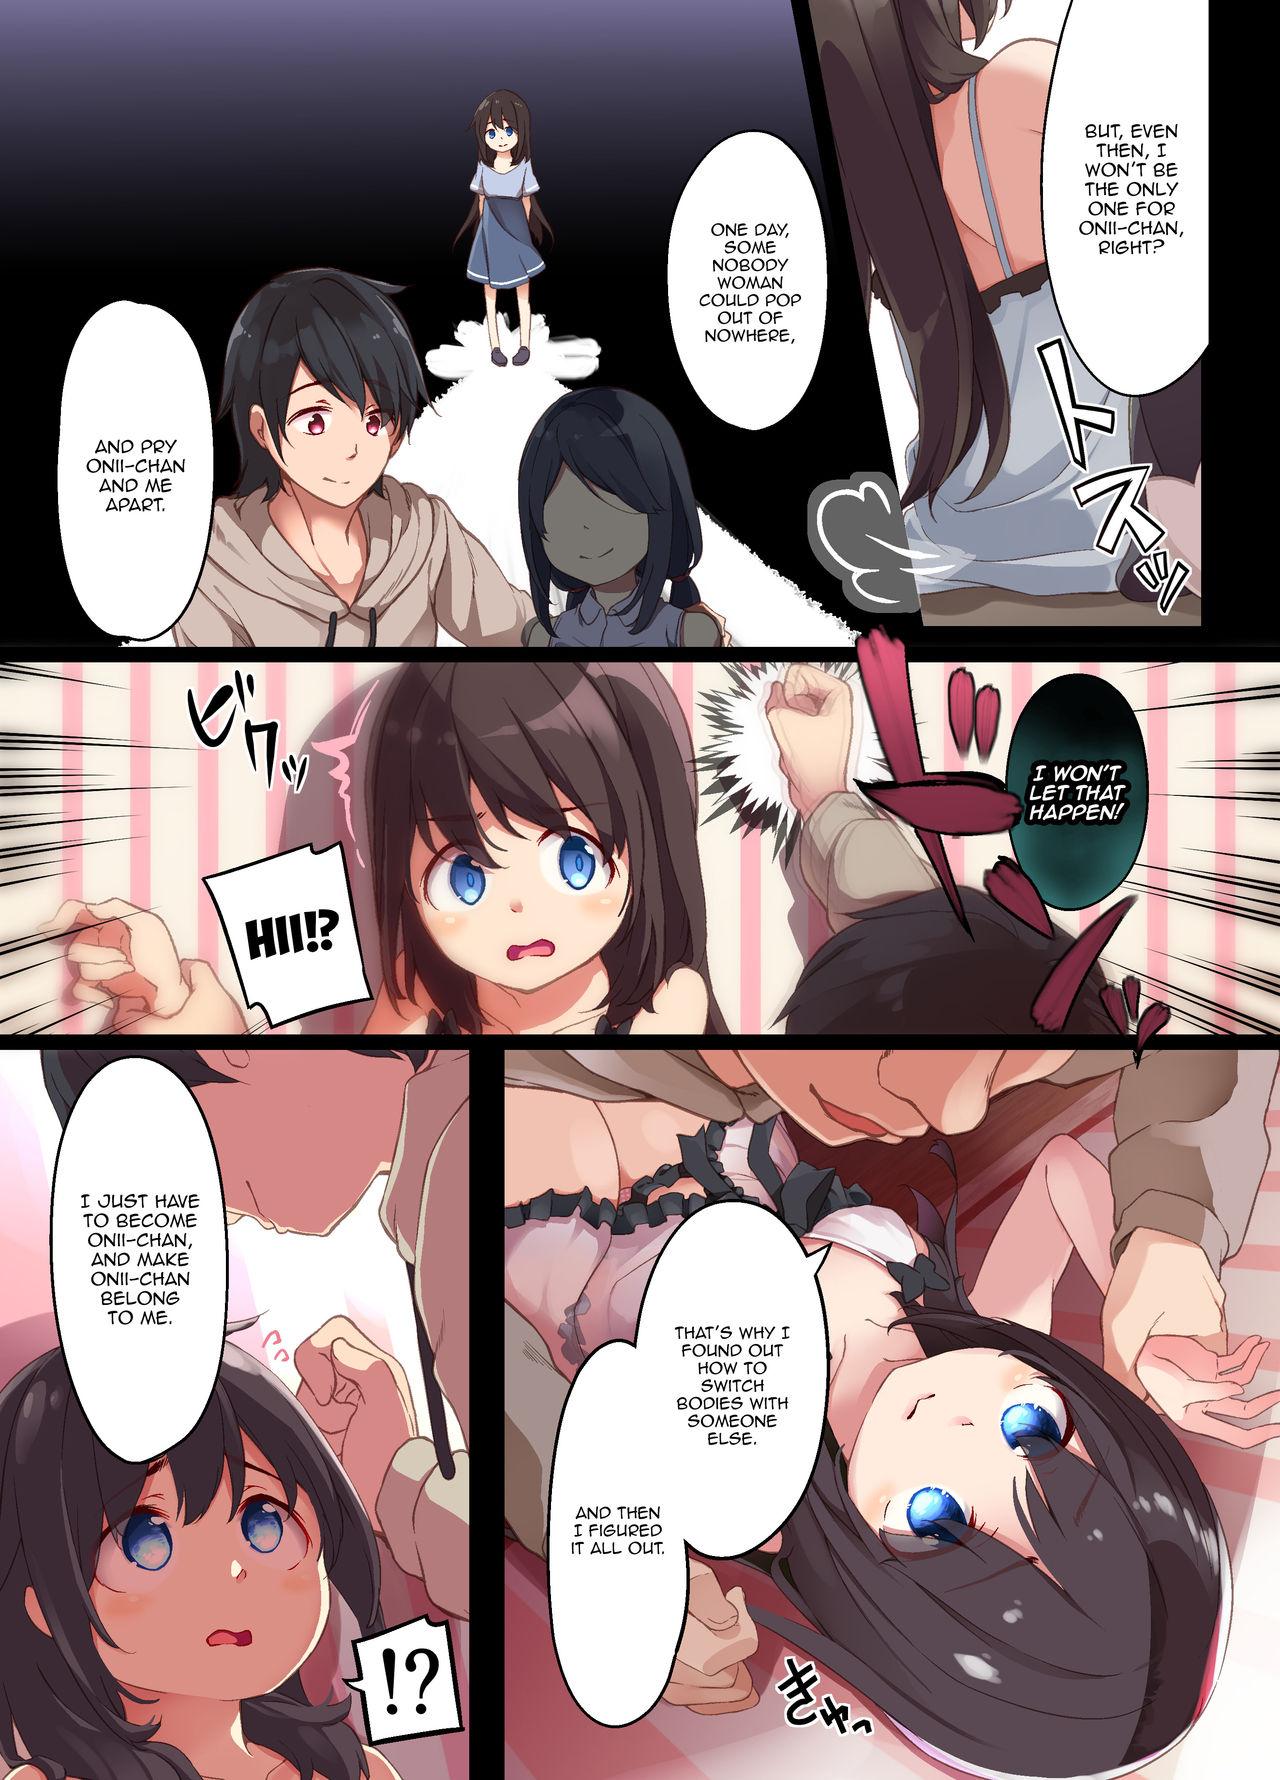 A Yandere Little Sister Wants to Be Impregnated by Her Big Brother, So She Switches Bodies With Him and They Have Baby-Making Sex 11